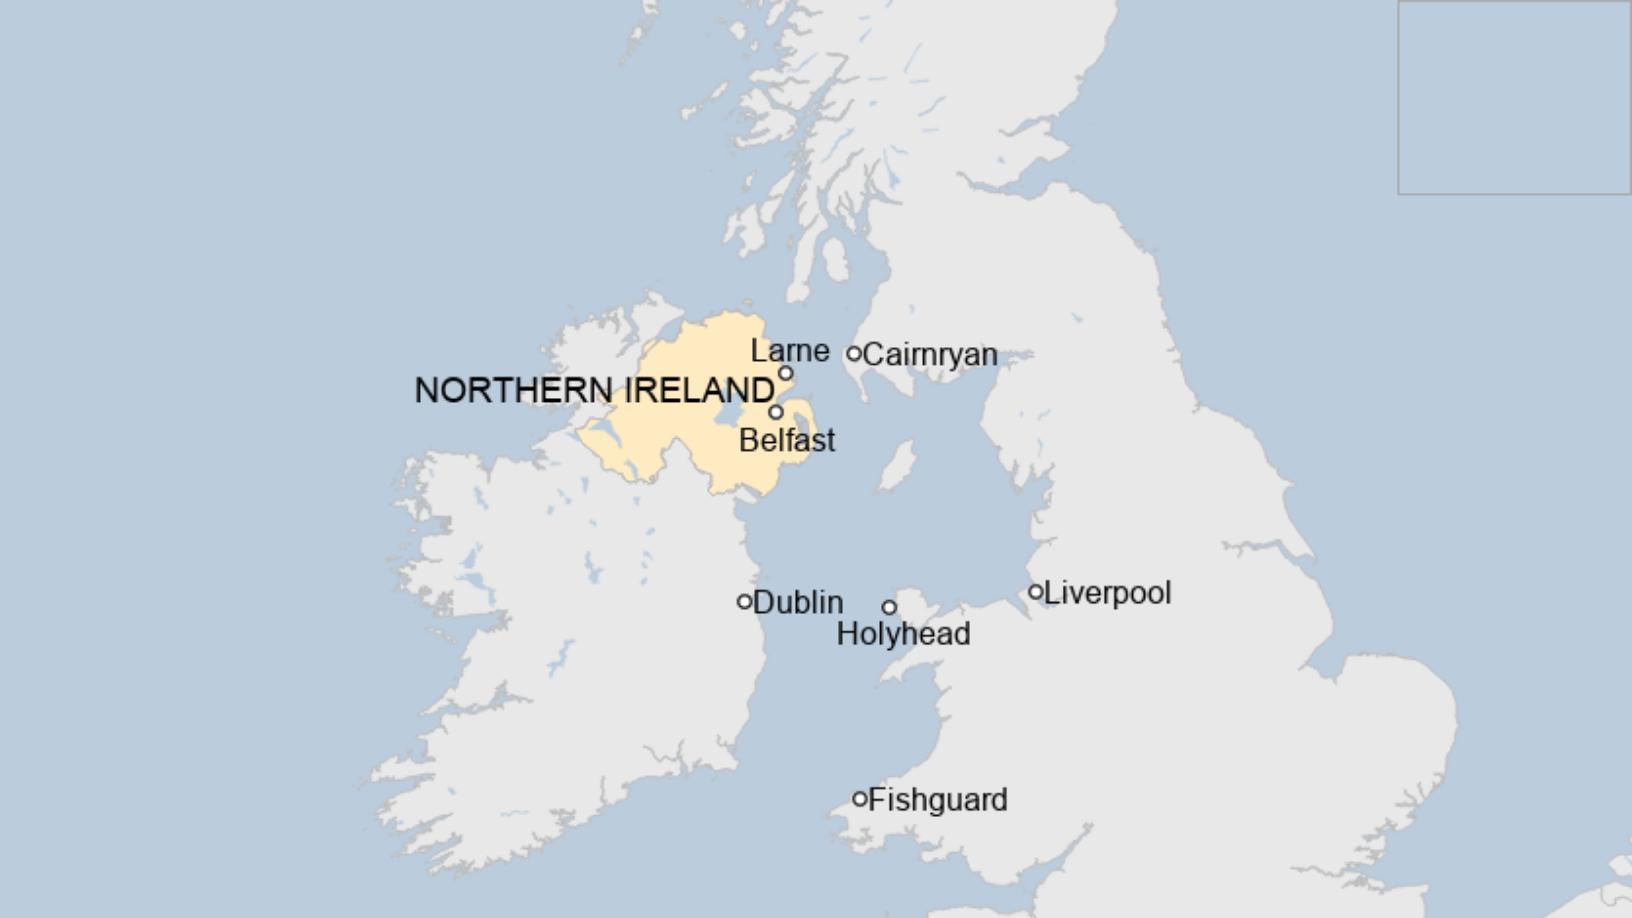 Map: Northern Ireland with key ports and cities